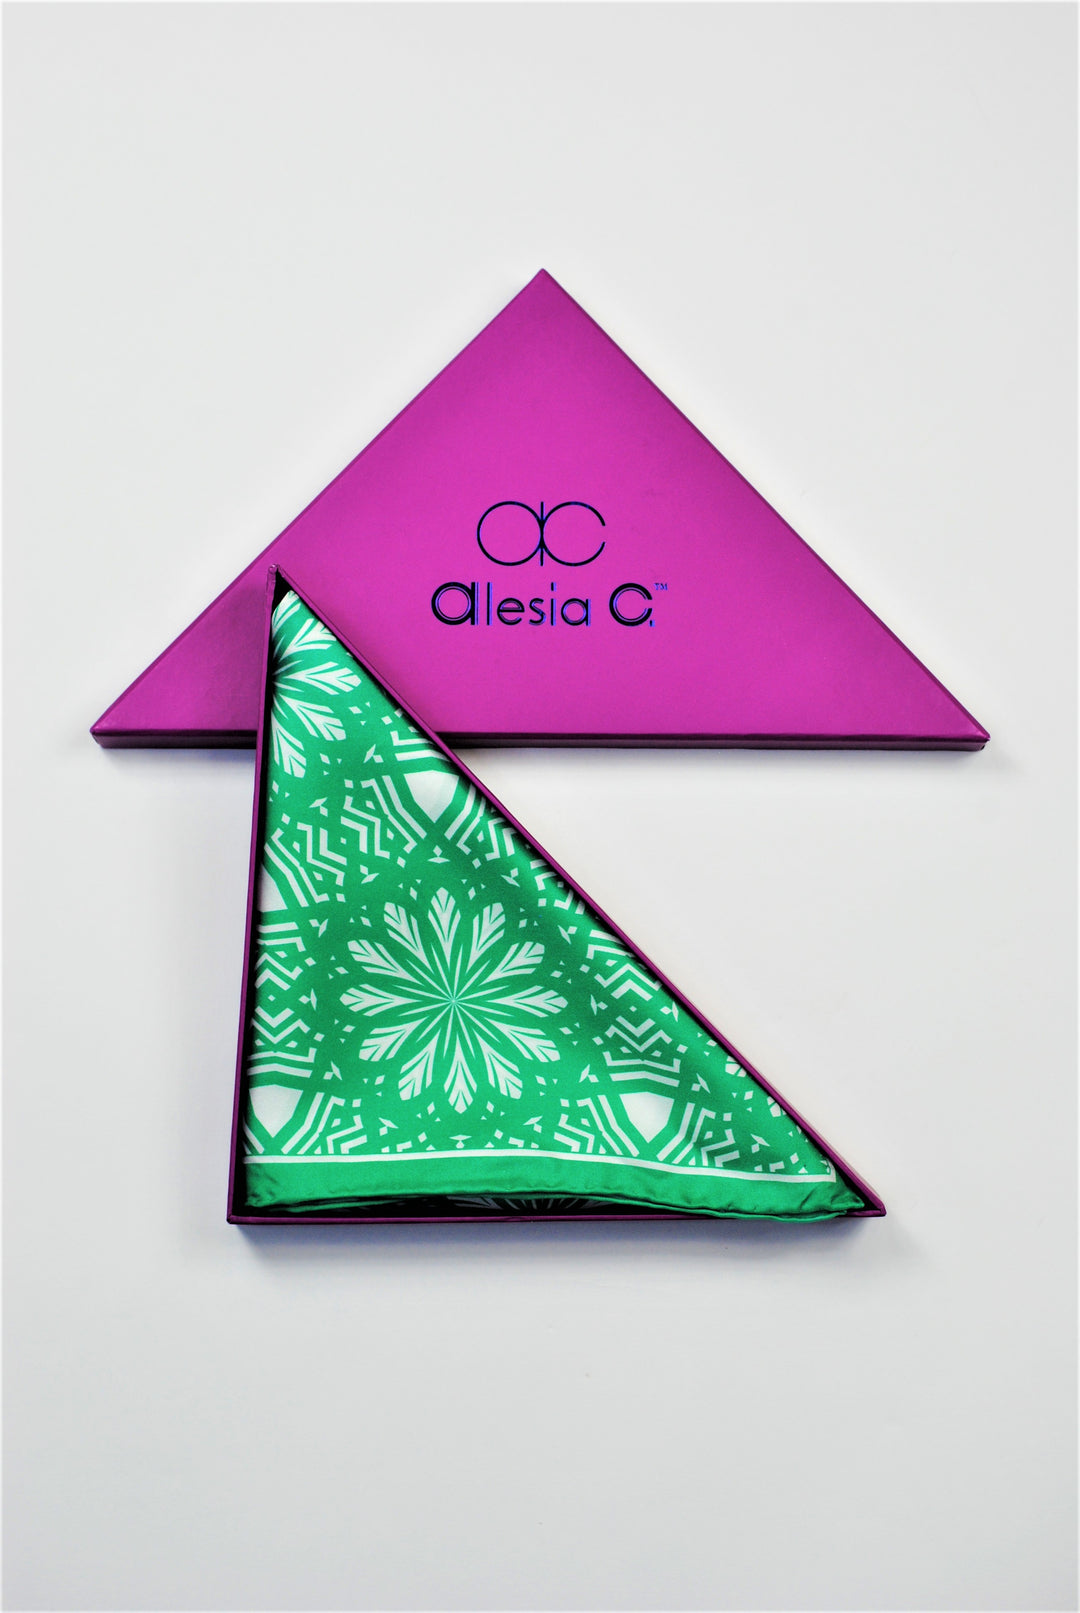 ASTER Spiritual Mandala Art Pure Silk Square Scarf in Green White by Chicago Fashion Designer Alesia Chaika Best Gift For Her